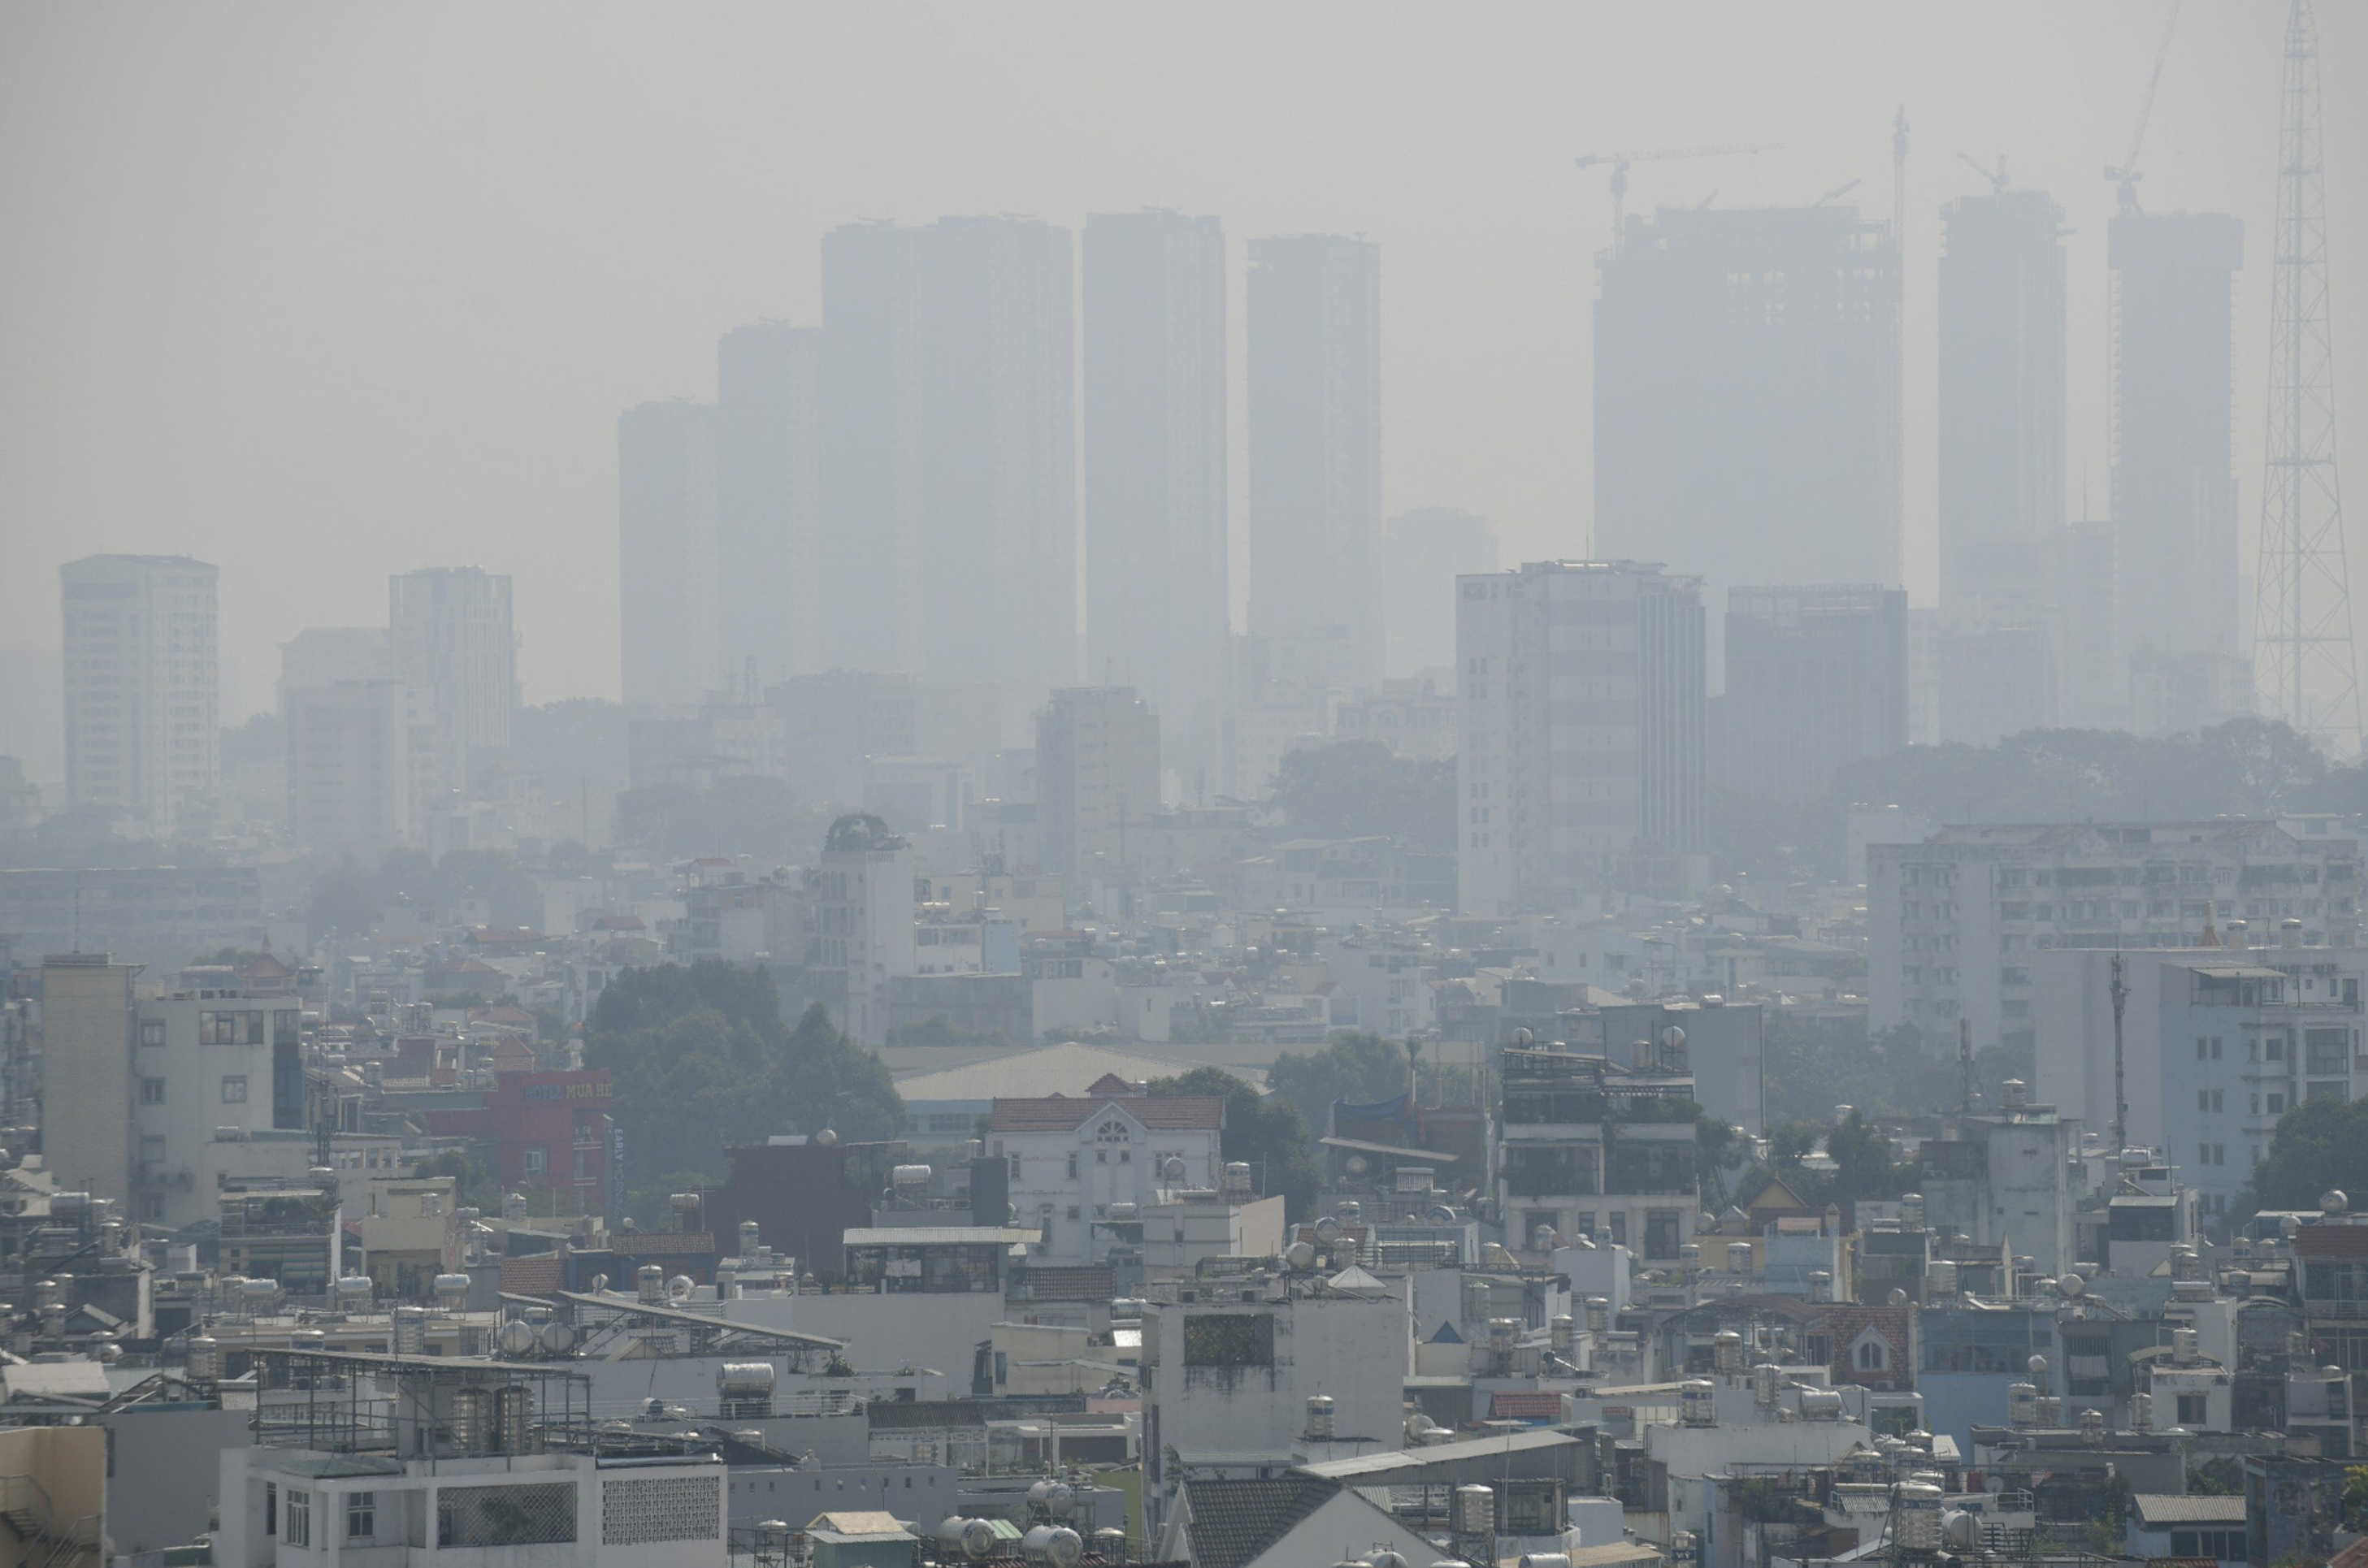 Dwellers in Ho Chi Minh City have been breathing unhealthy air these days. Photo: Quang Dinh / Tuoi Tre